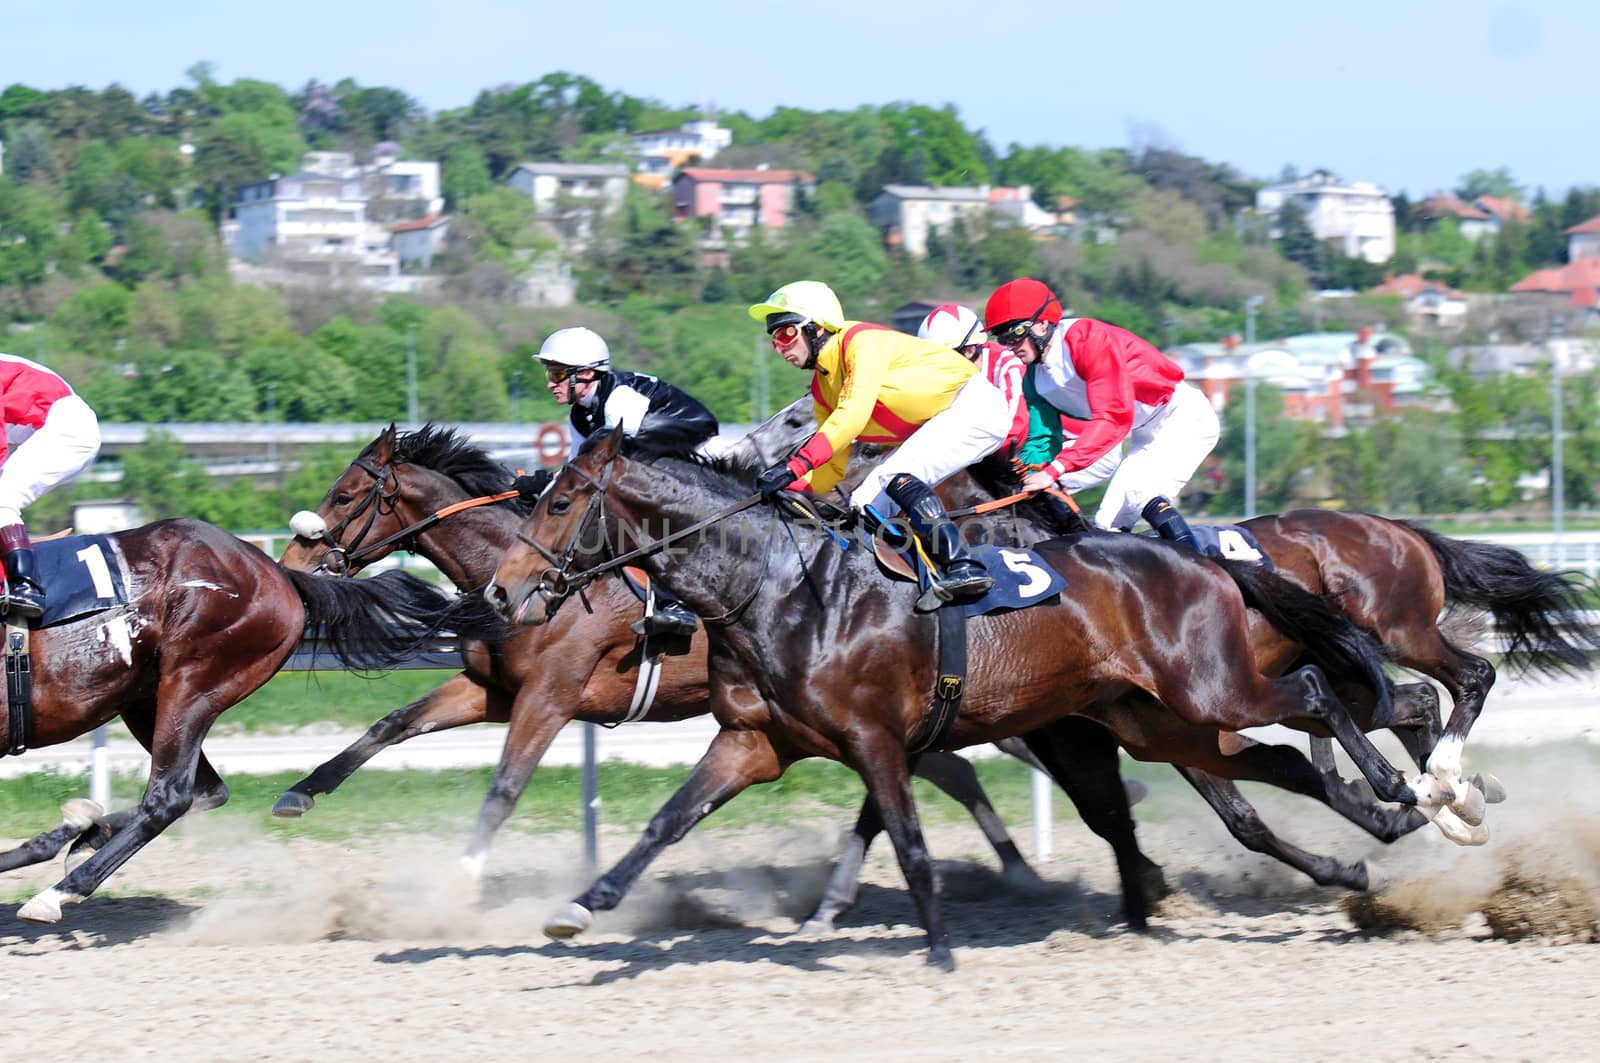 BELGRADE,SERBIA-SEPTEMBER 2:Unidentified horses and jockeys in gallop in race "Wretham House" on September 2, 2011 in Belgrade, Serbia